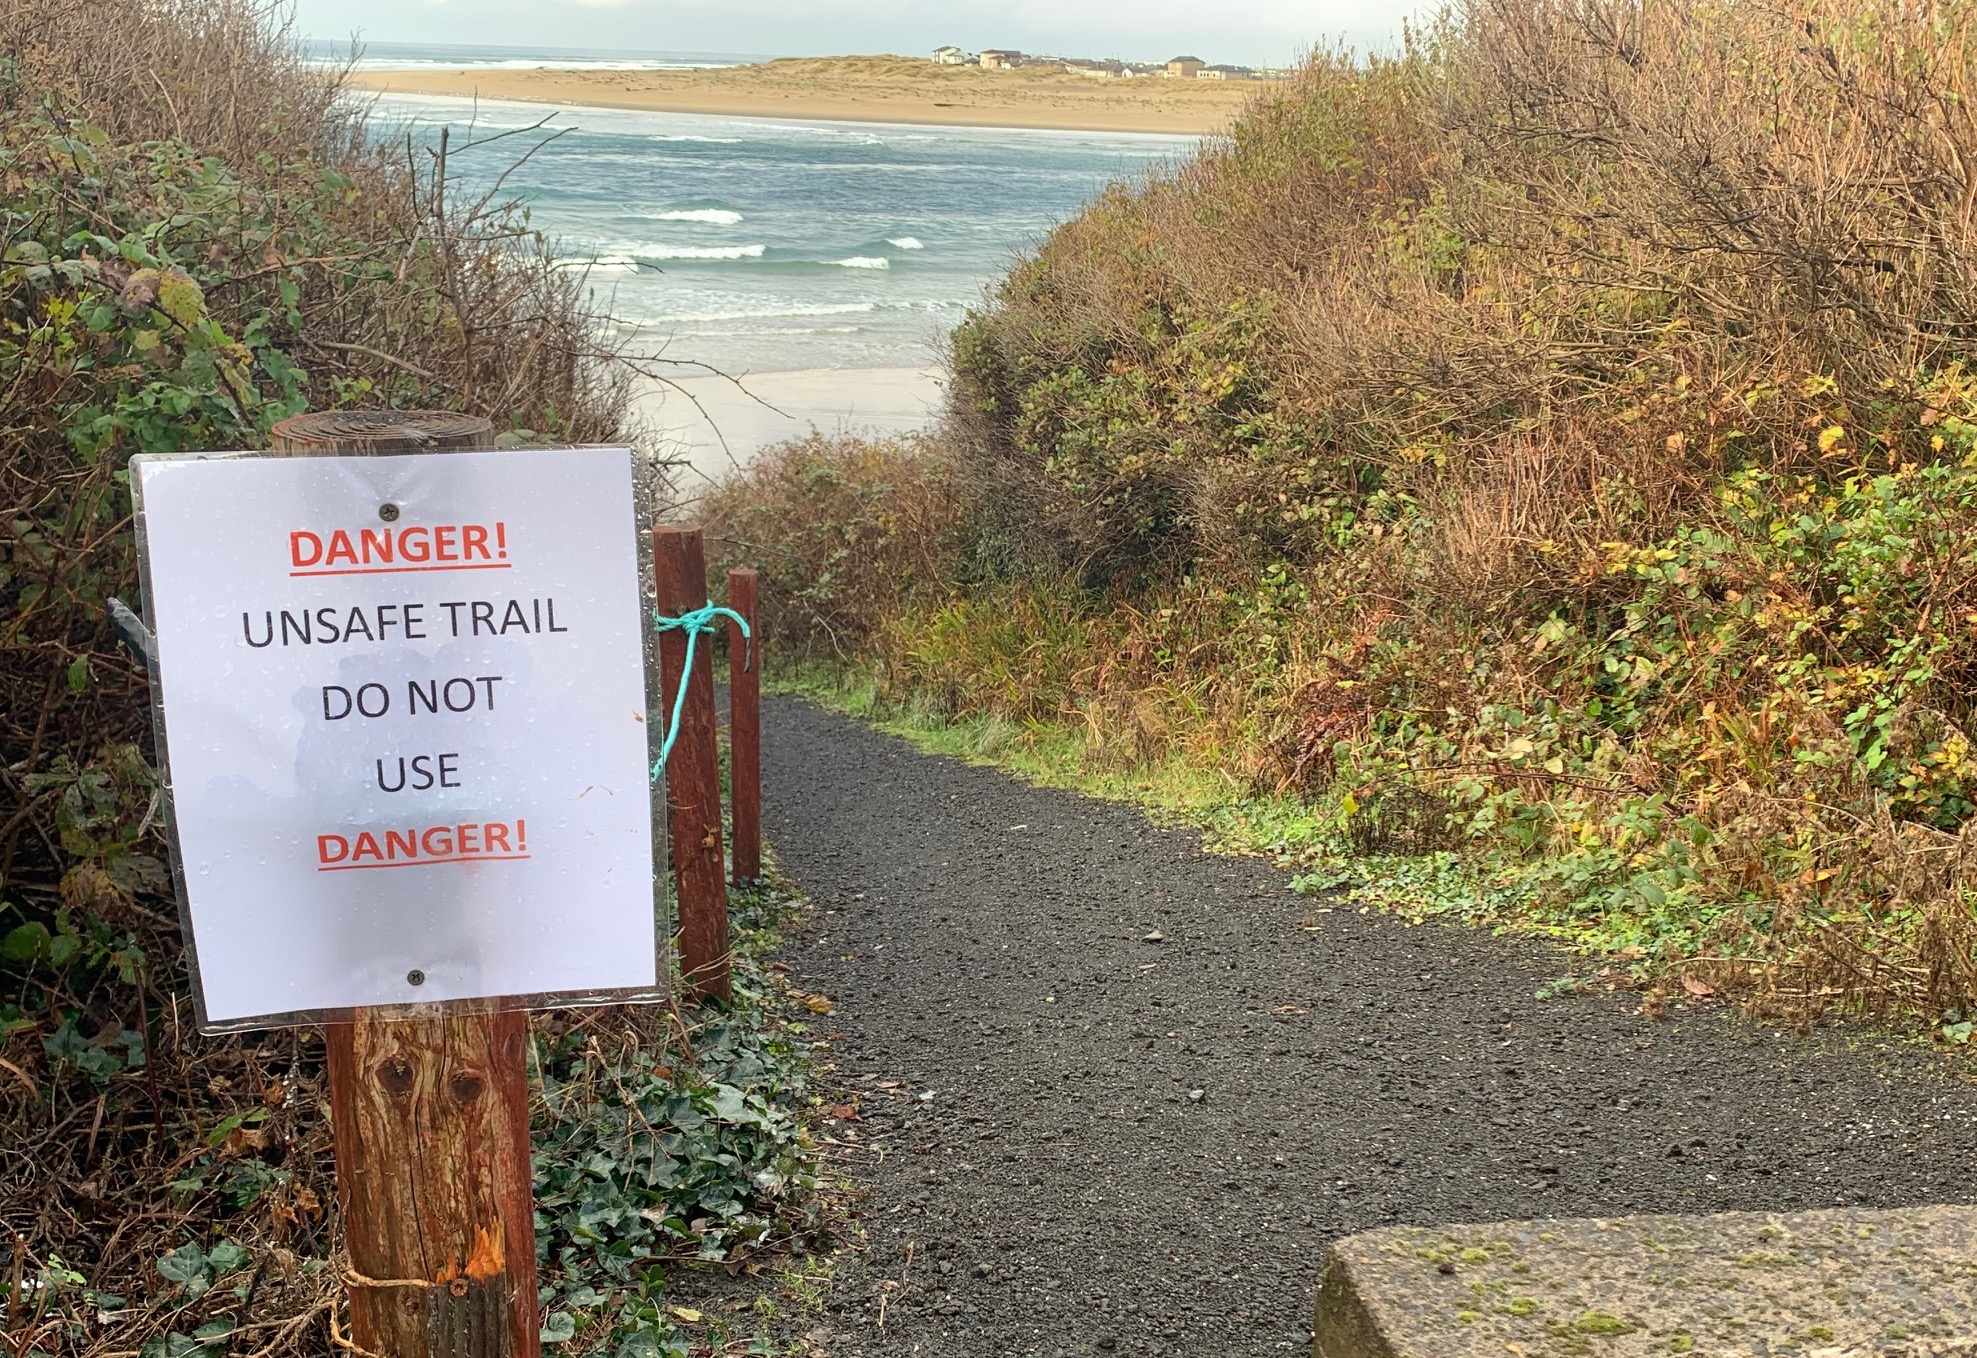 Agencies release a plan to better connect pieces of the Oregon Coast Trail